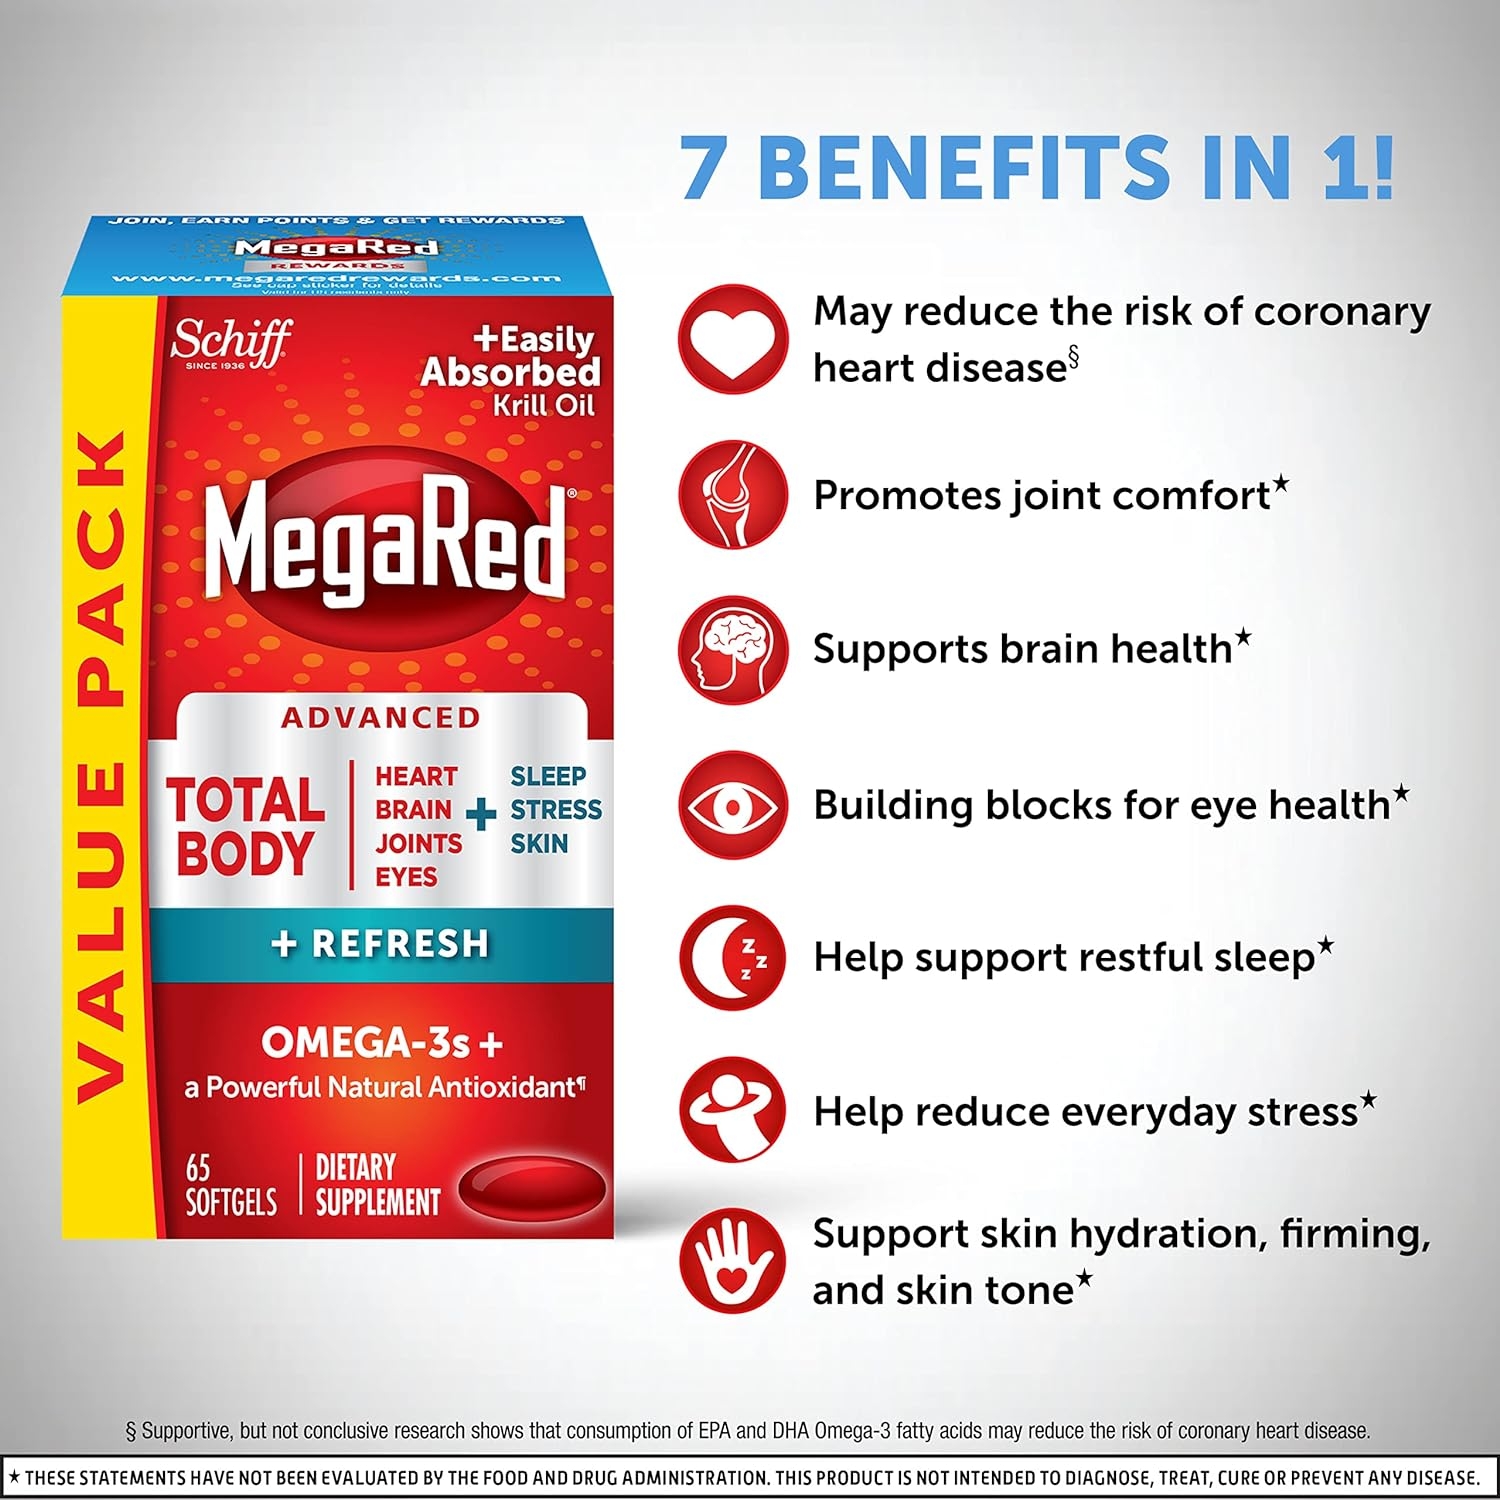 Omega-3 Blend Total Body + Refresh 500mg Softgels, MegaRed (65 count in a bottle), Easily Absorbed Krill Oil, To Support Your Heart, Joints, Brain & Eyes